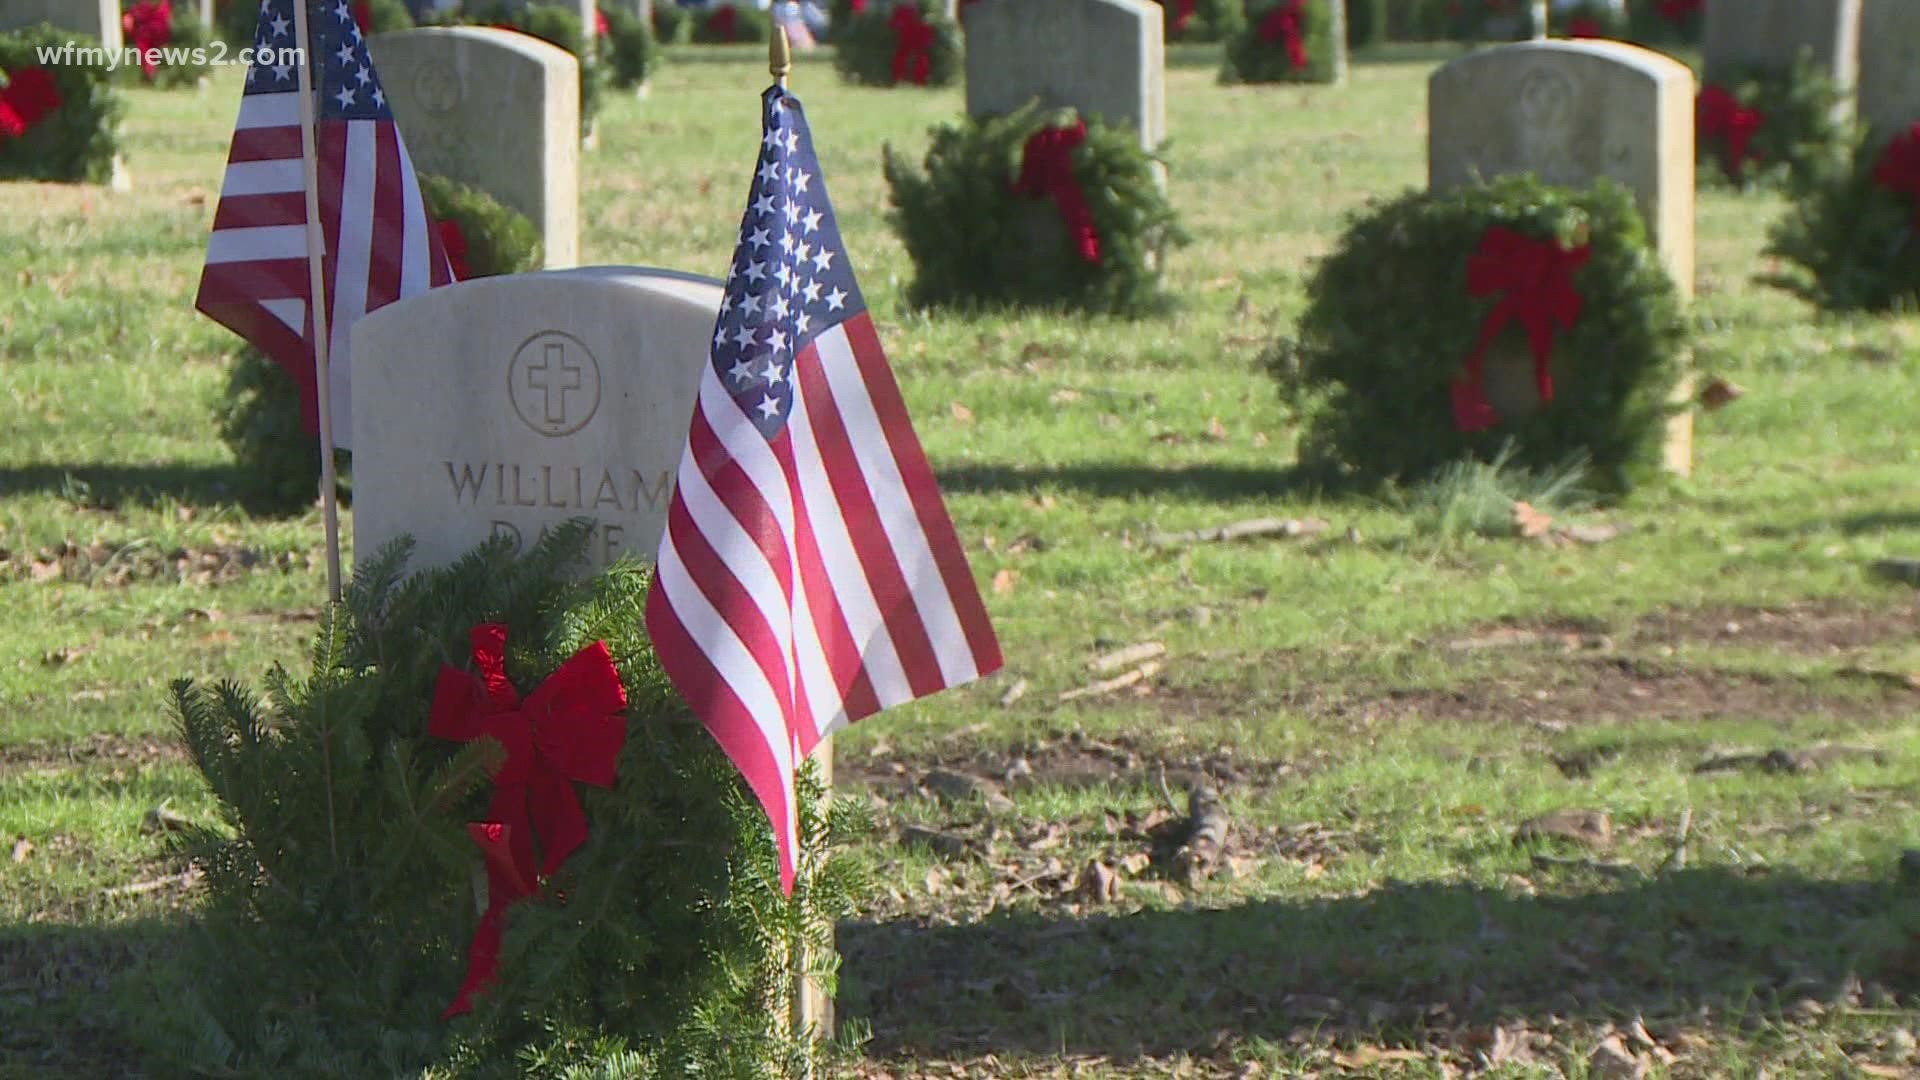 After scaling back the 2020 event, Wreaths Across Greensboro now invites all families to this year's special service to place 1,100 wreaths on veterans' graves.